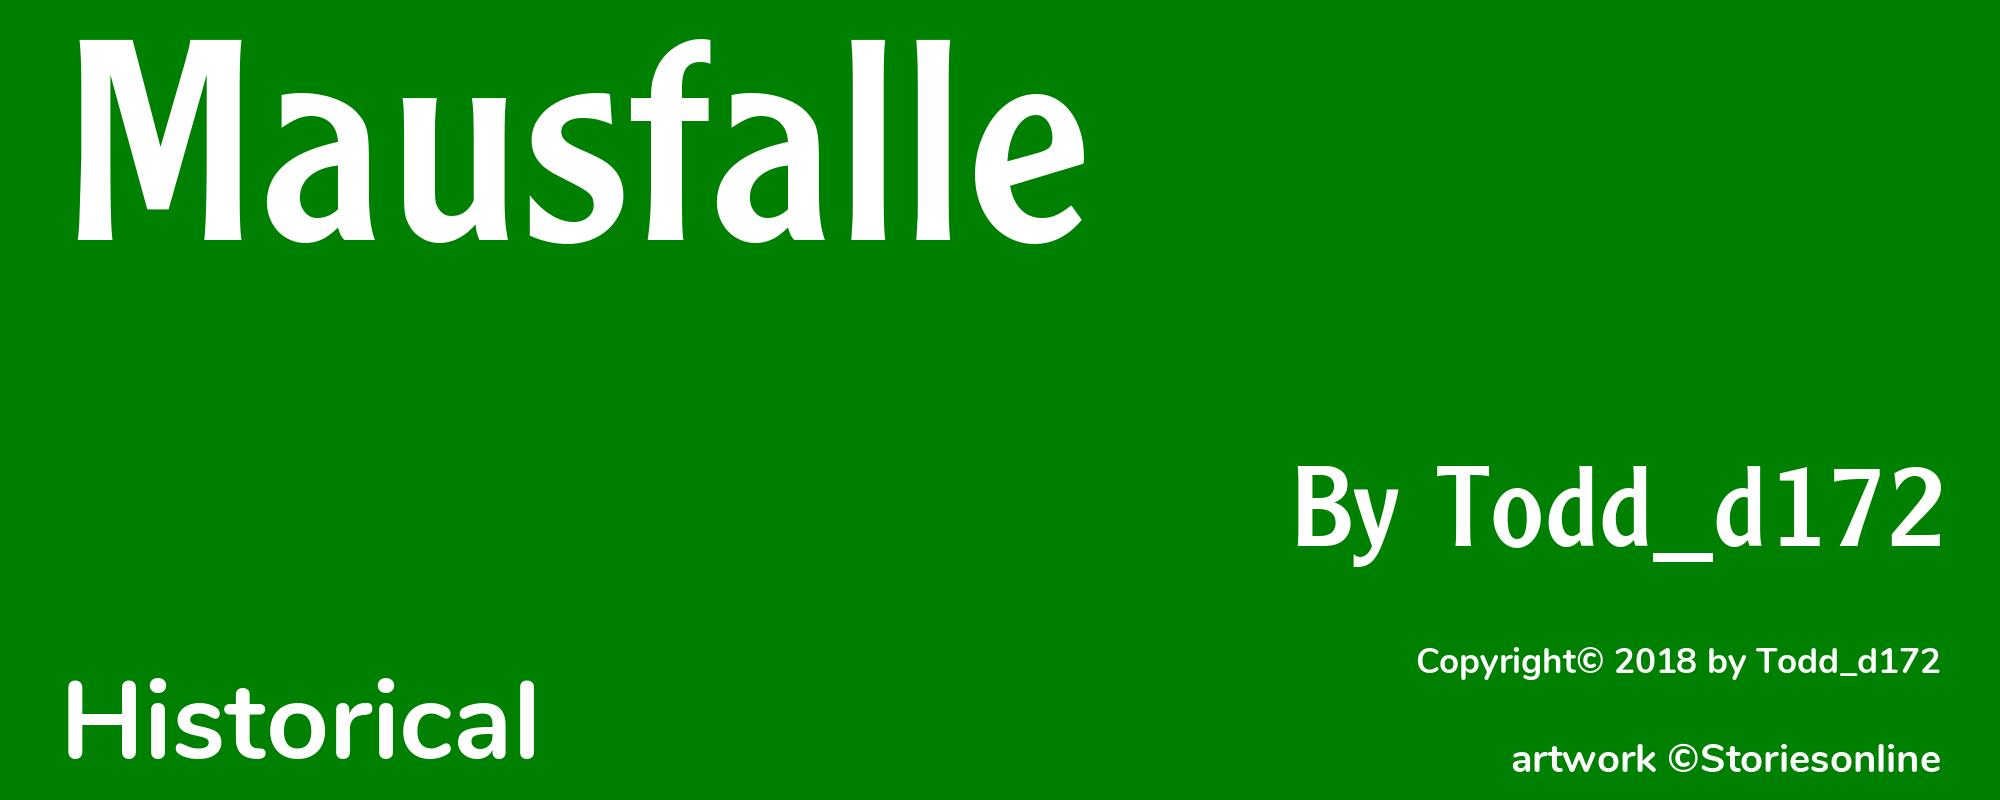 Mausfalle - Cover